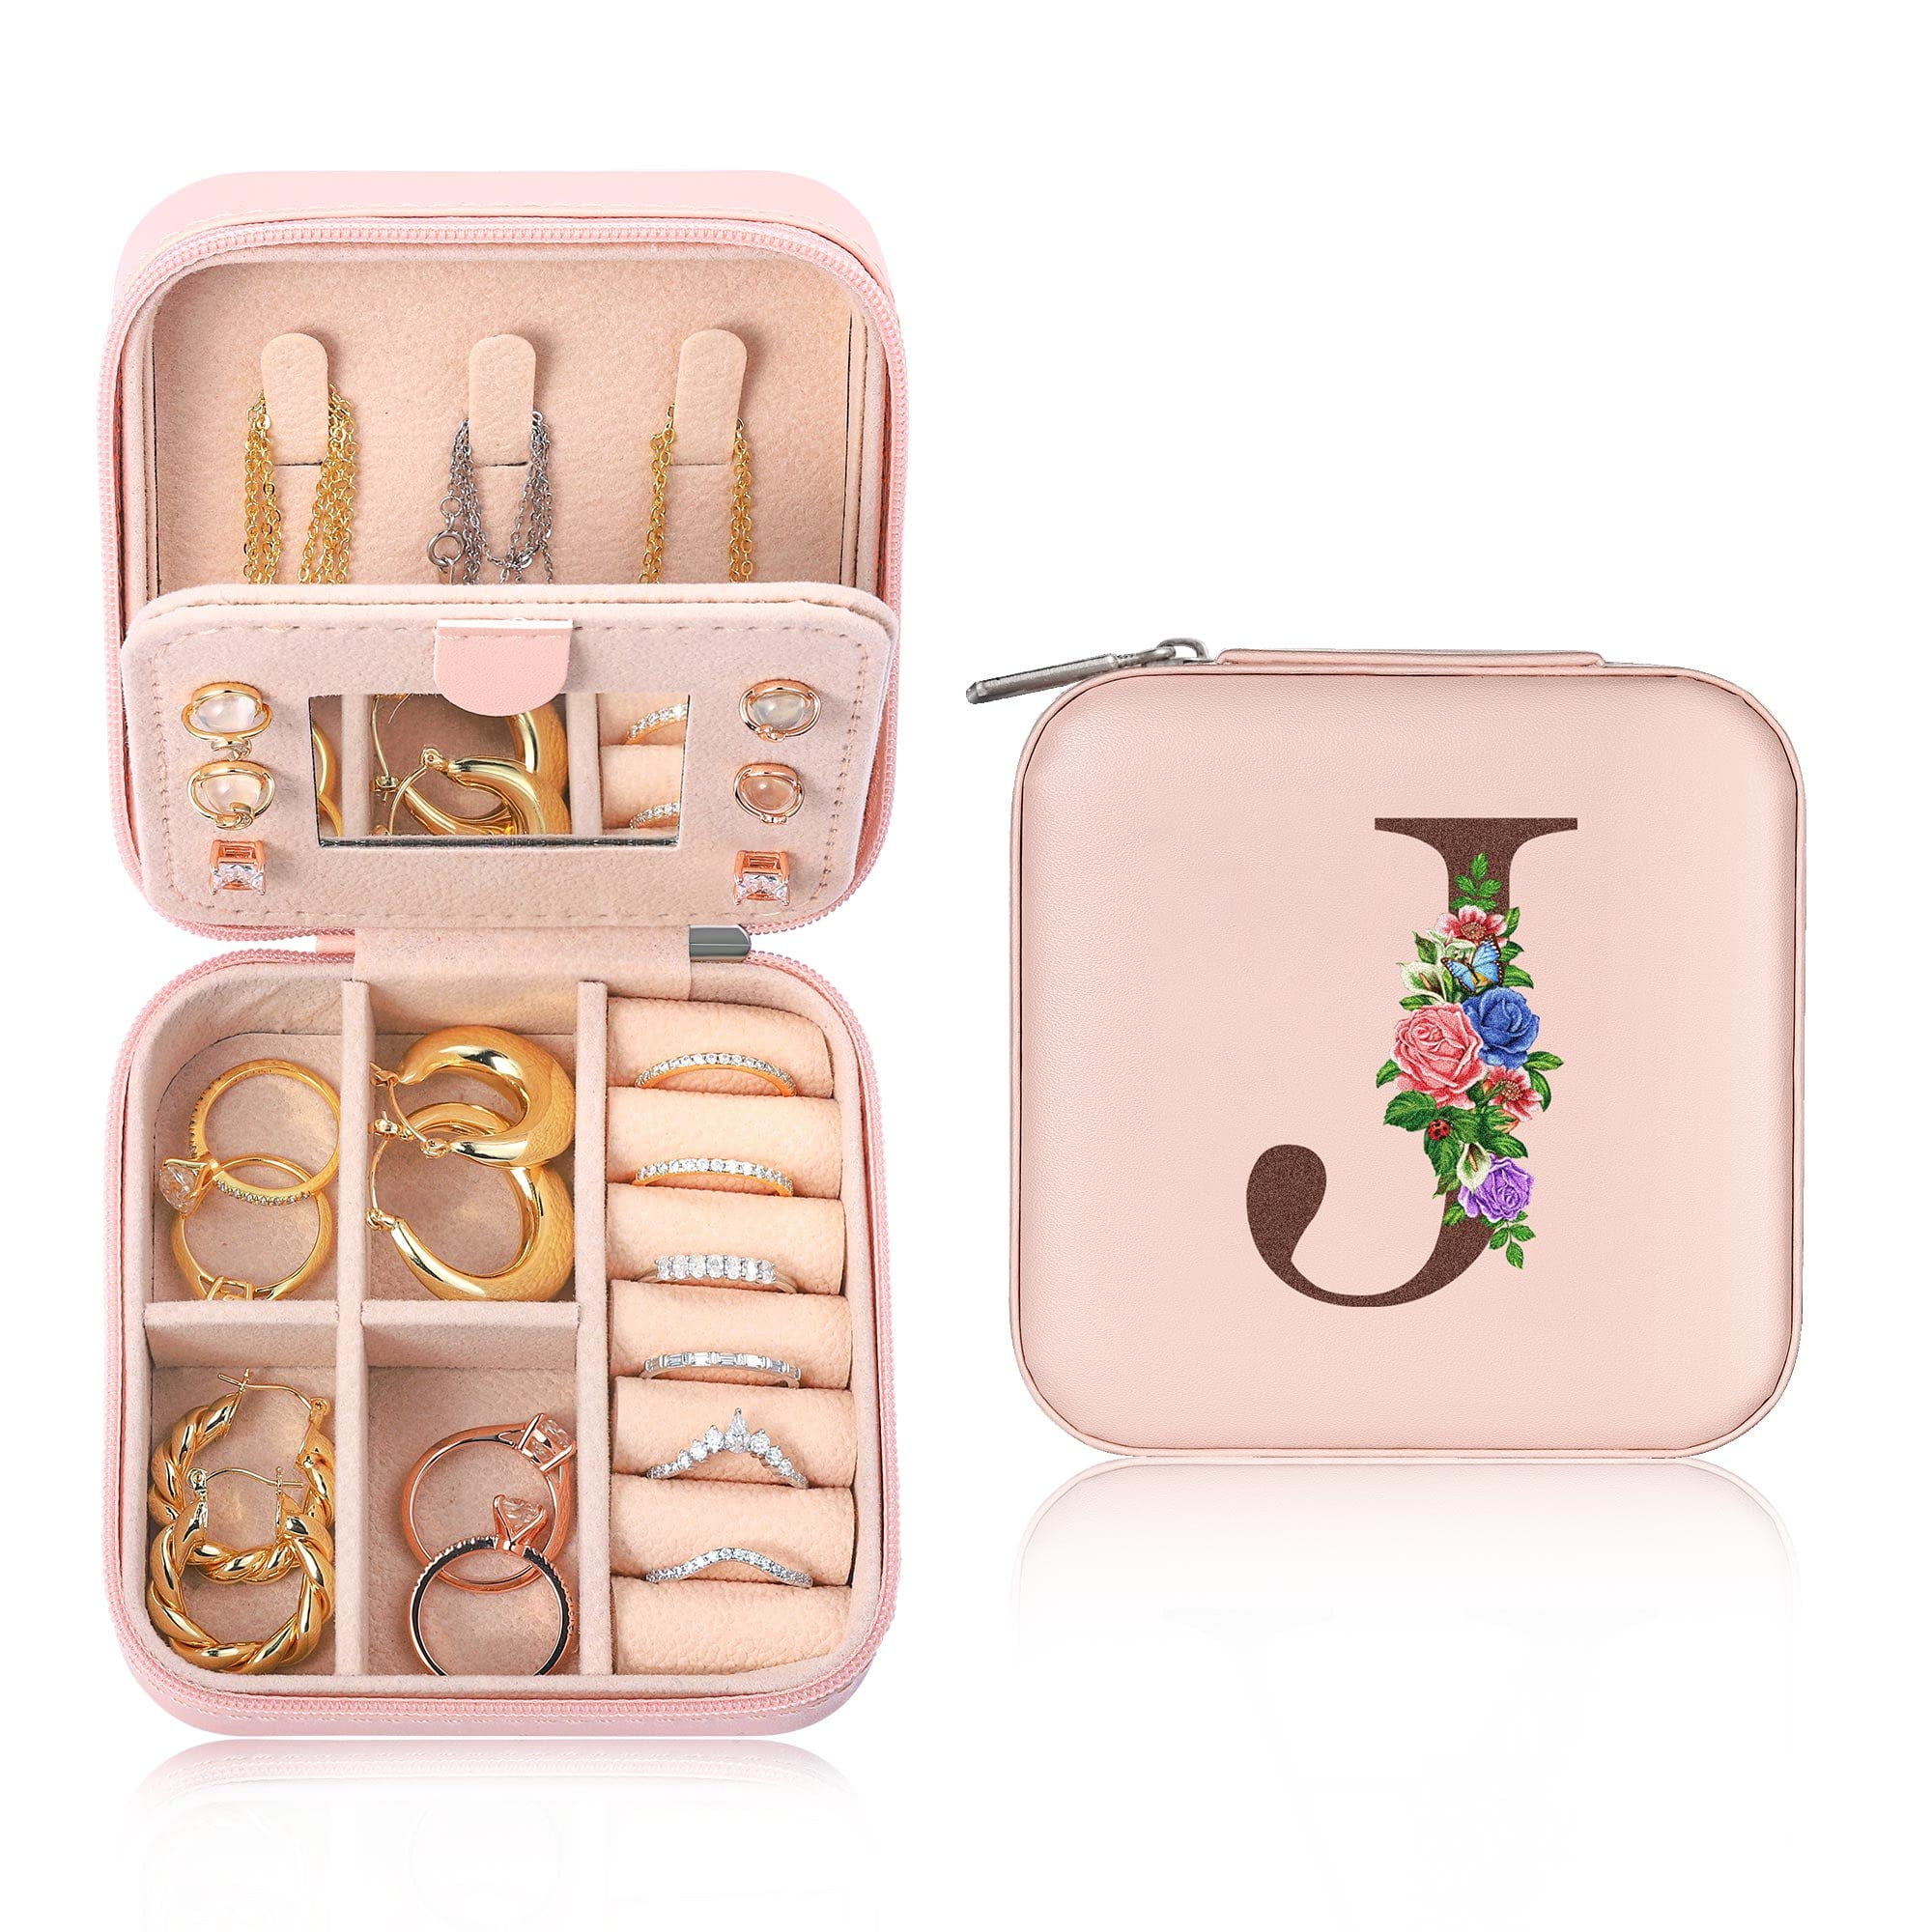 Small Jewelry Box, Mini Jewelry case Double Layer Travel Jewelry Organizer  for Women,Anti tarnish jewelry box for Rings Earrings Necklace,Gifts for  Girls 